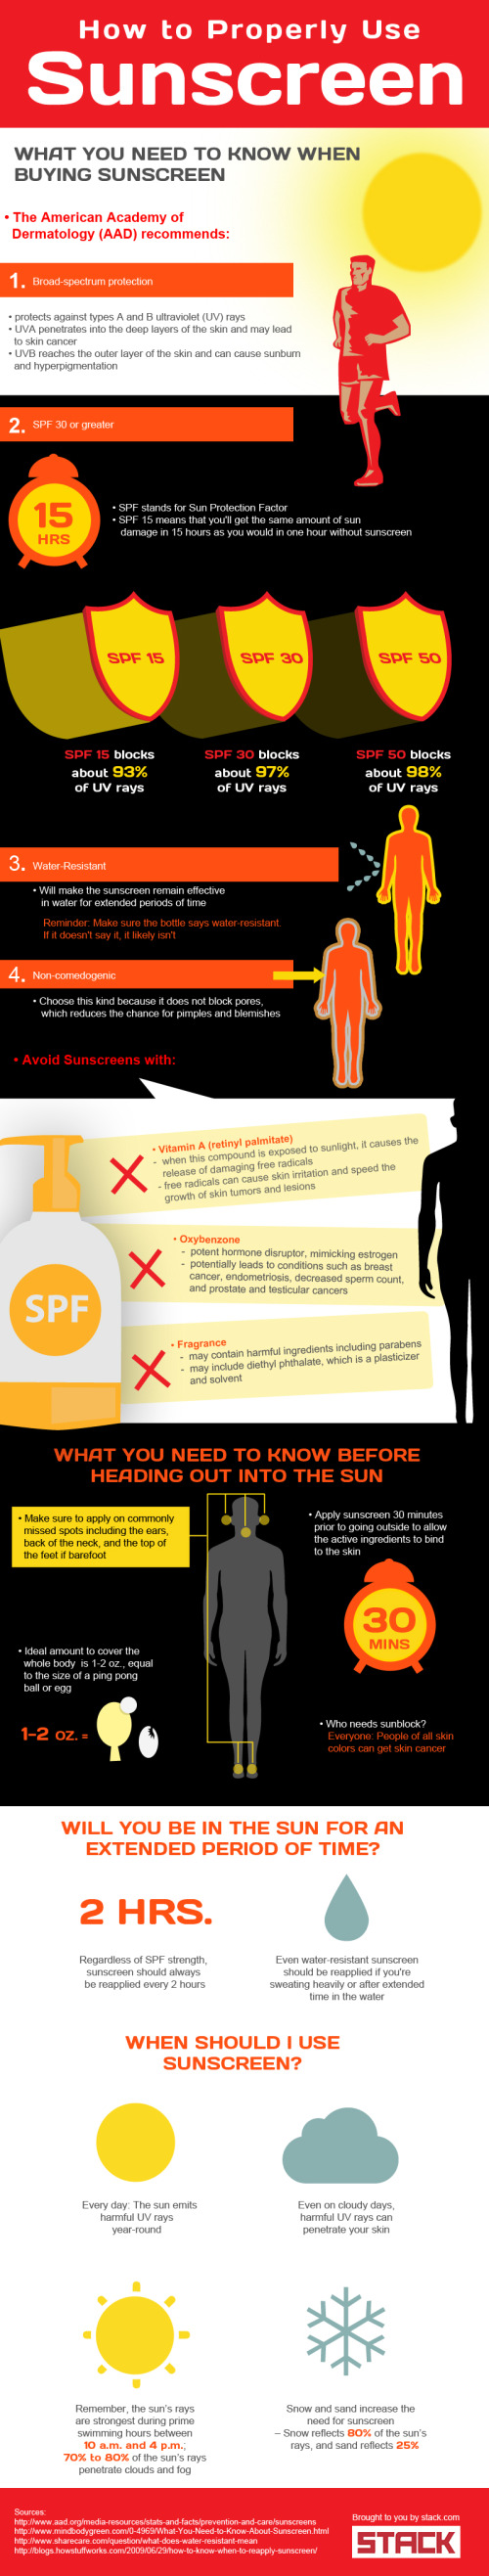 STACK How To Use Sunscreen Properly infographic